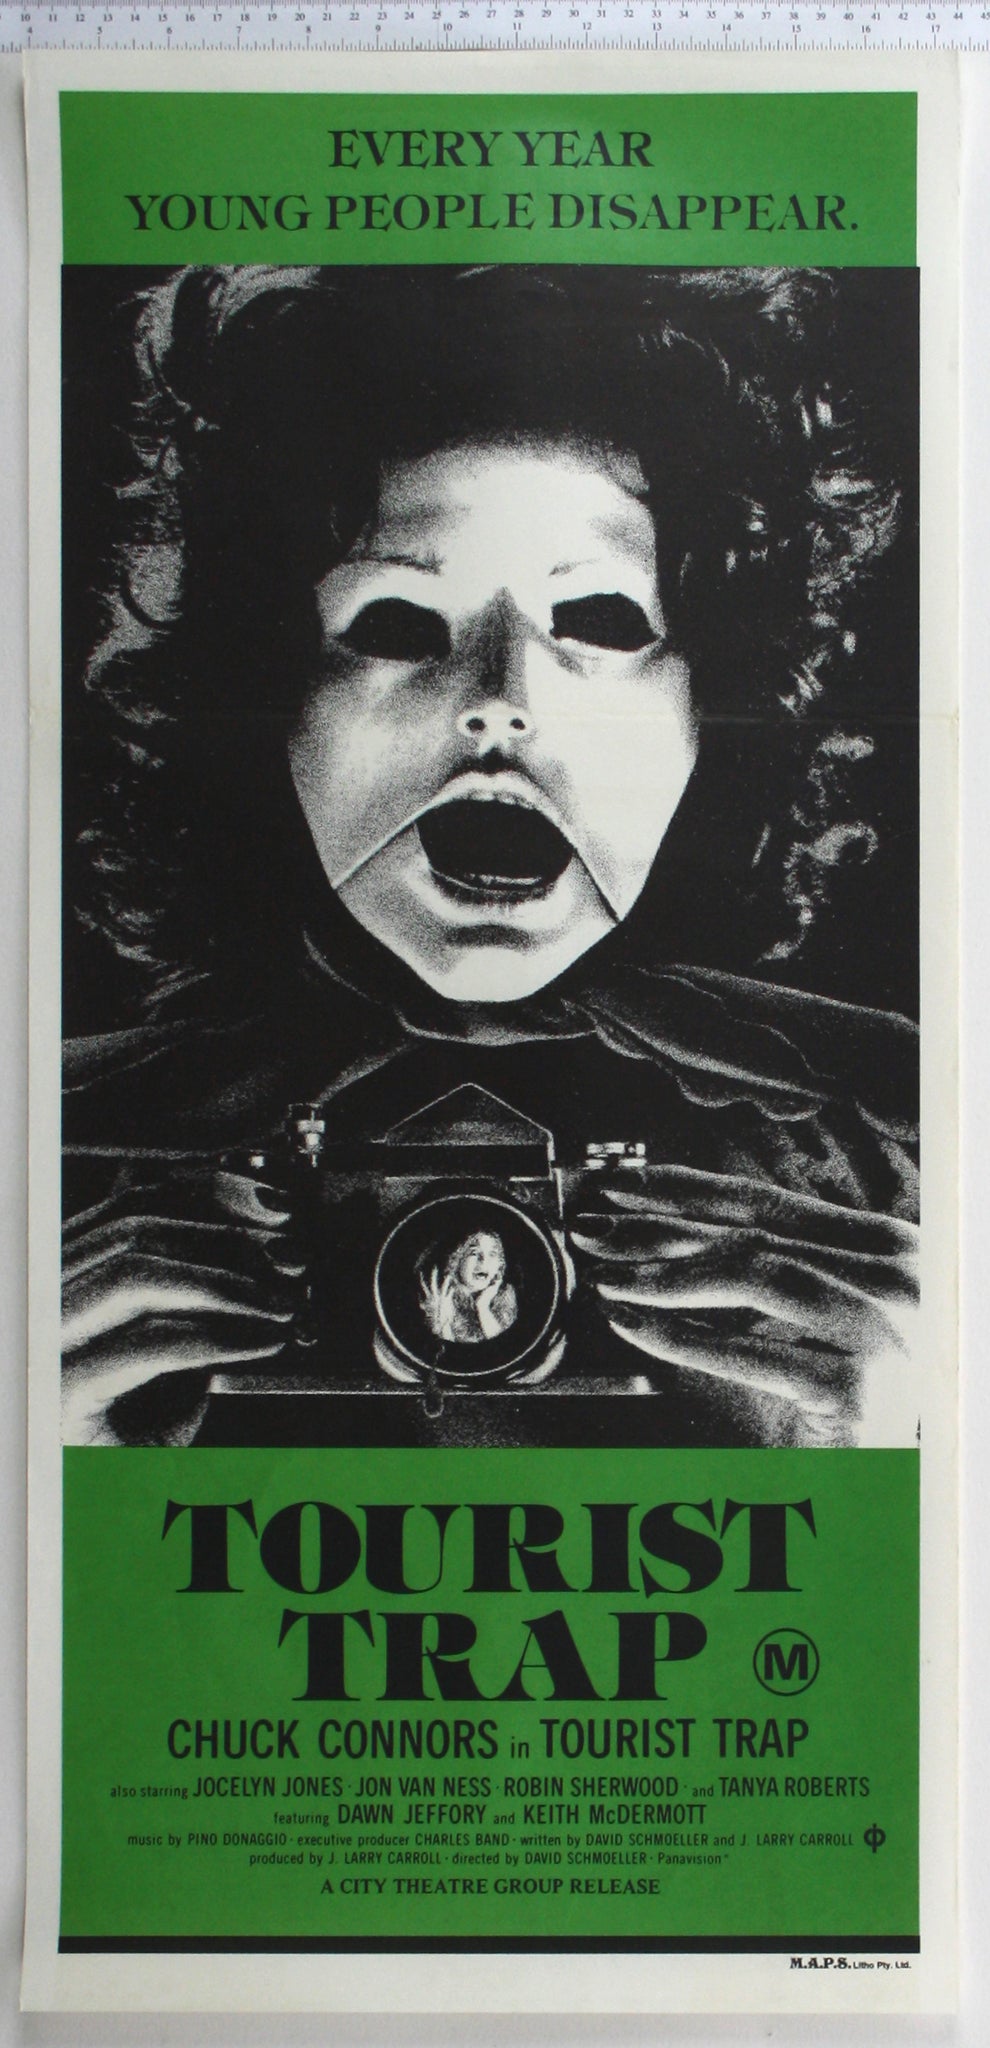 B+W artwork on green, inset figure of blank-eyed mannequin with human mouth, holding camera reflecting terrified woman.